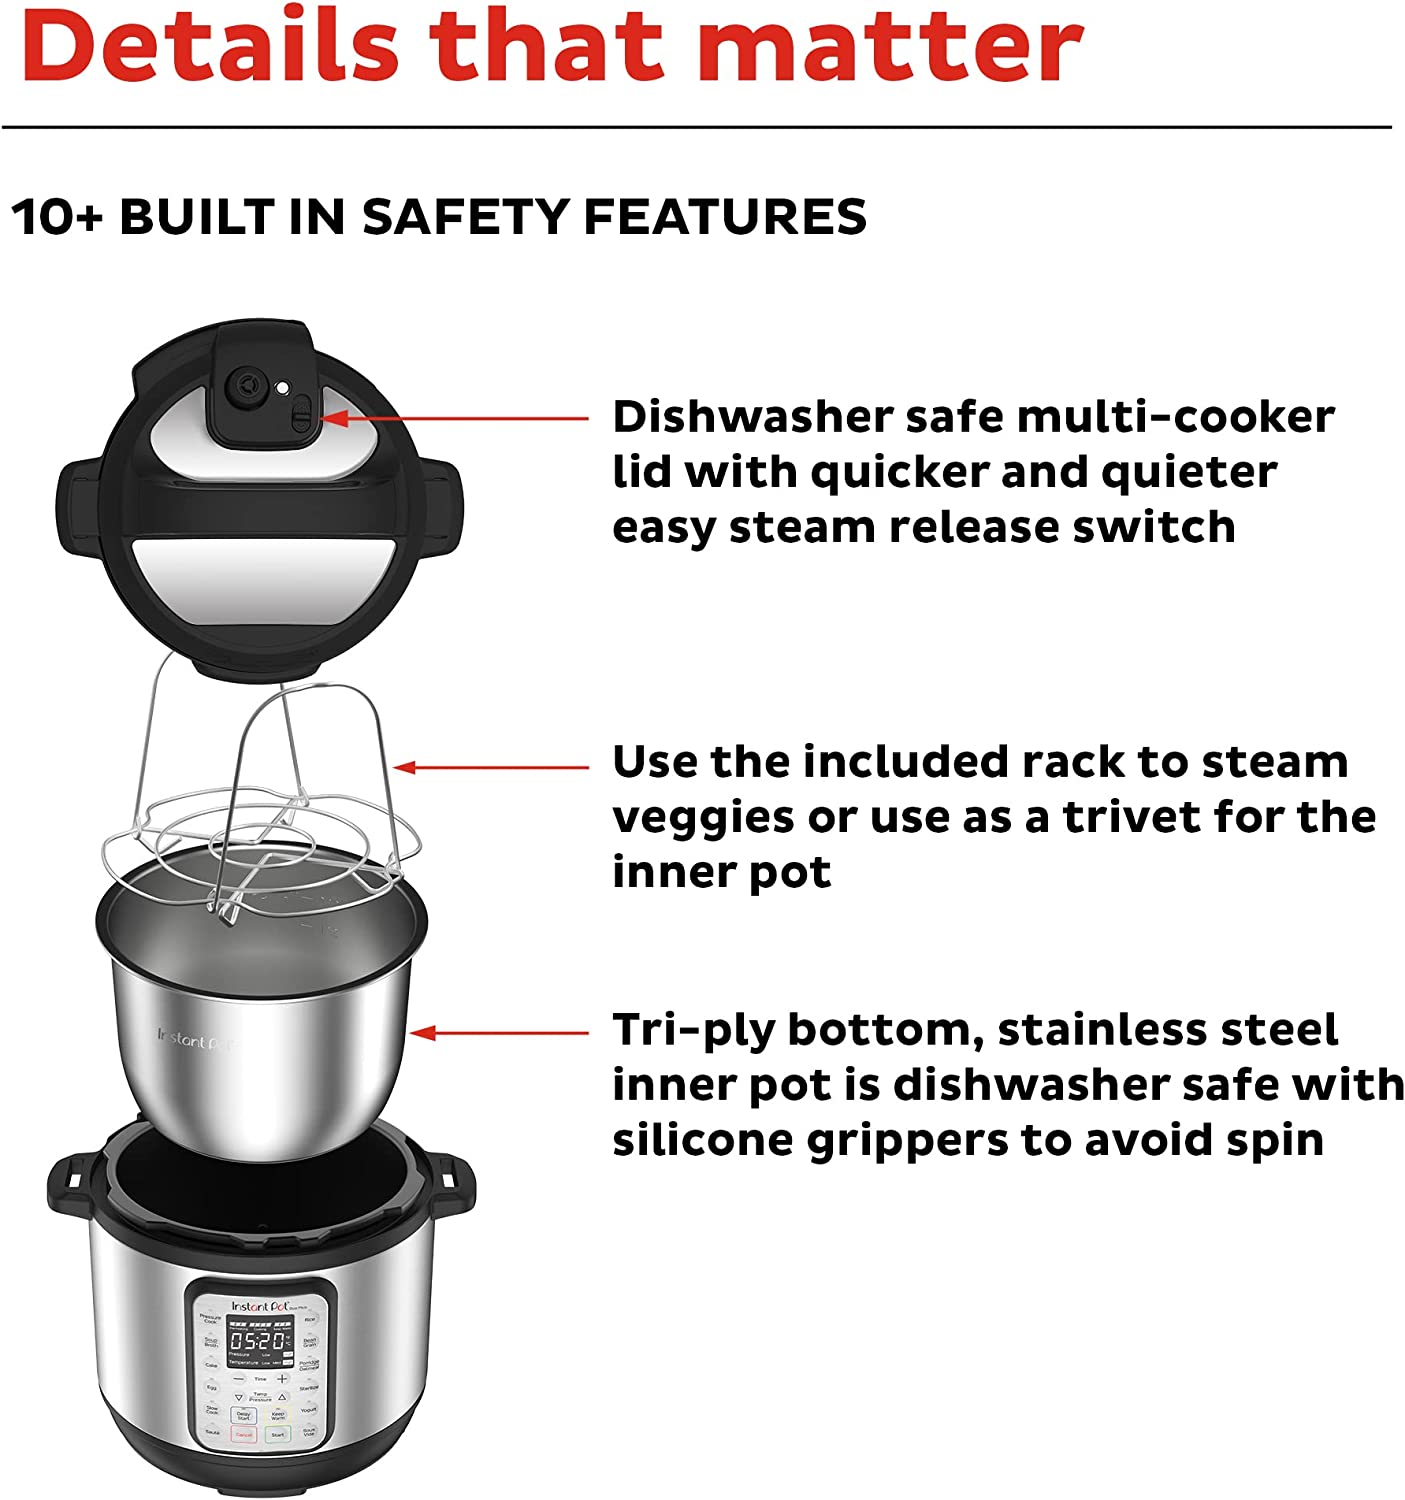 https://bigbigmart.com/wp-content/uploads/2023/06/Instant-Pot-Duo-Plus-9-in-1-Electric-Pressure-Cooker-Slow-Cooker-Rice-Cooker-Steamer-Saute-Yogurt-Maker-Warmer-Sterilizer-Includes-Free-App-with-over-1900-Recipes-Stainless-Steel-8-Quart5.jpg